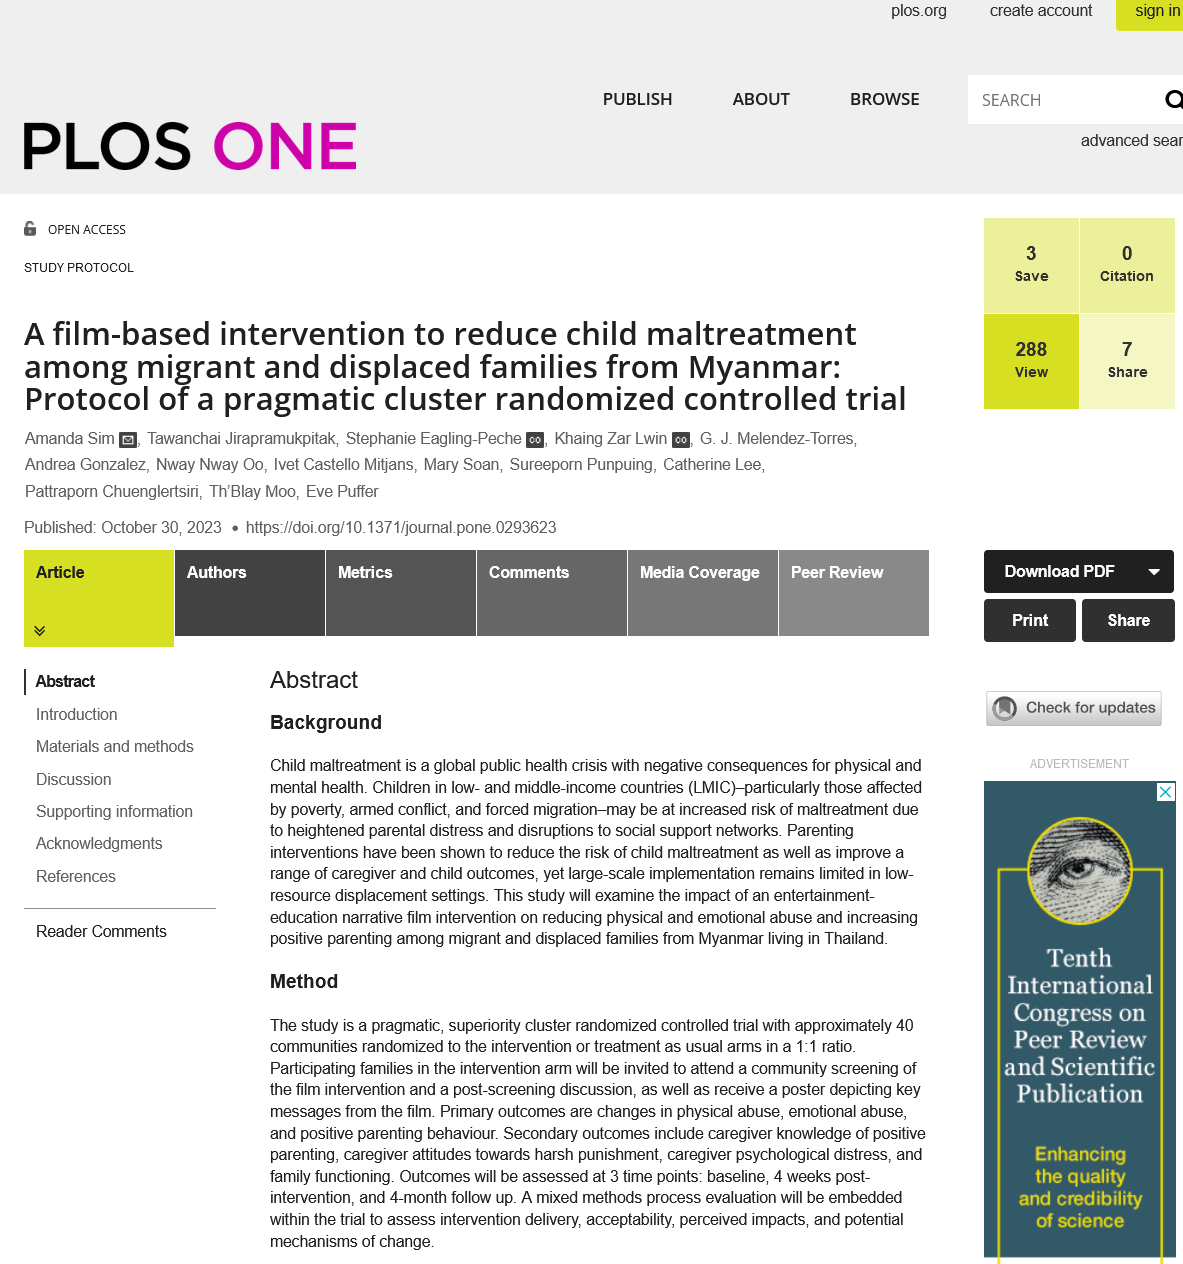 A film-based intervention to reduce child maltreatment among migrant and displaced families from Myanmar: Protocol of a pragmatic cluster randomized controlled trial